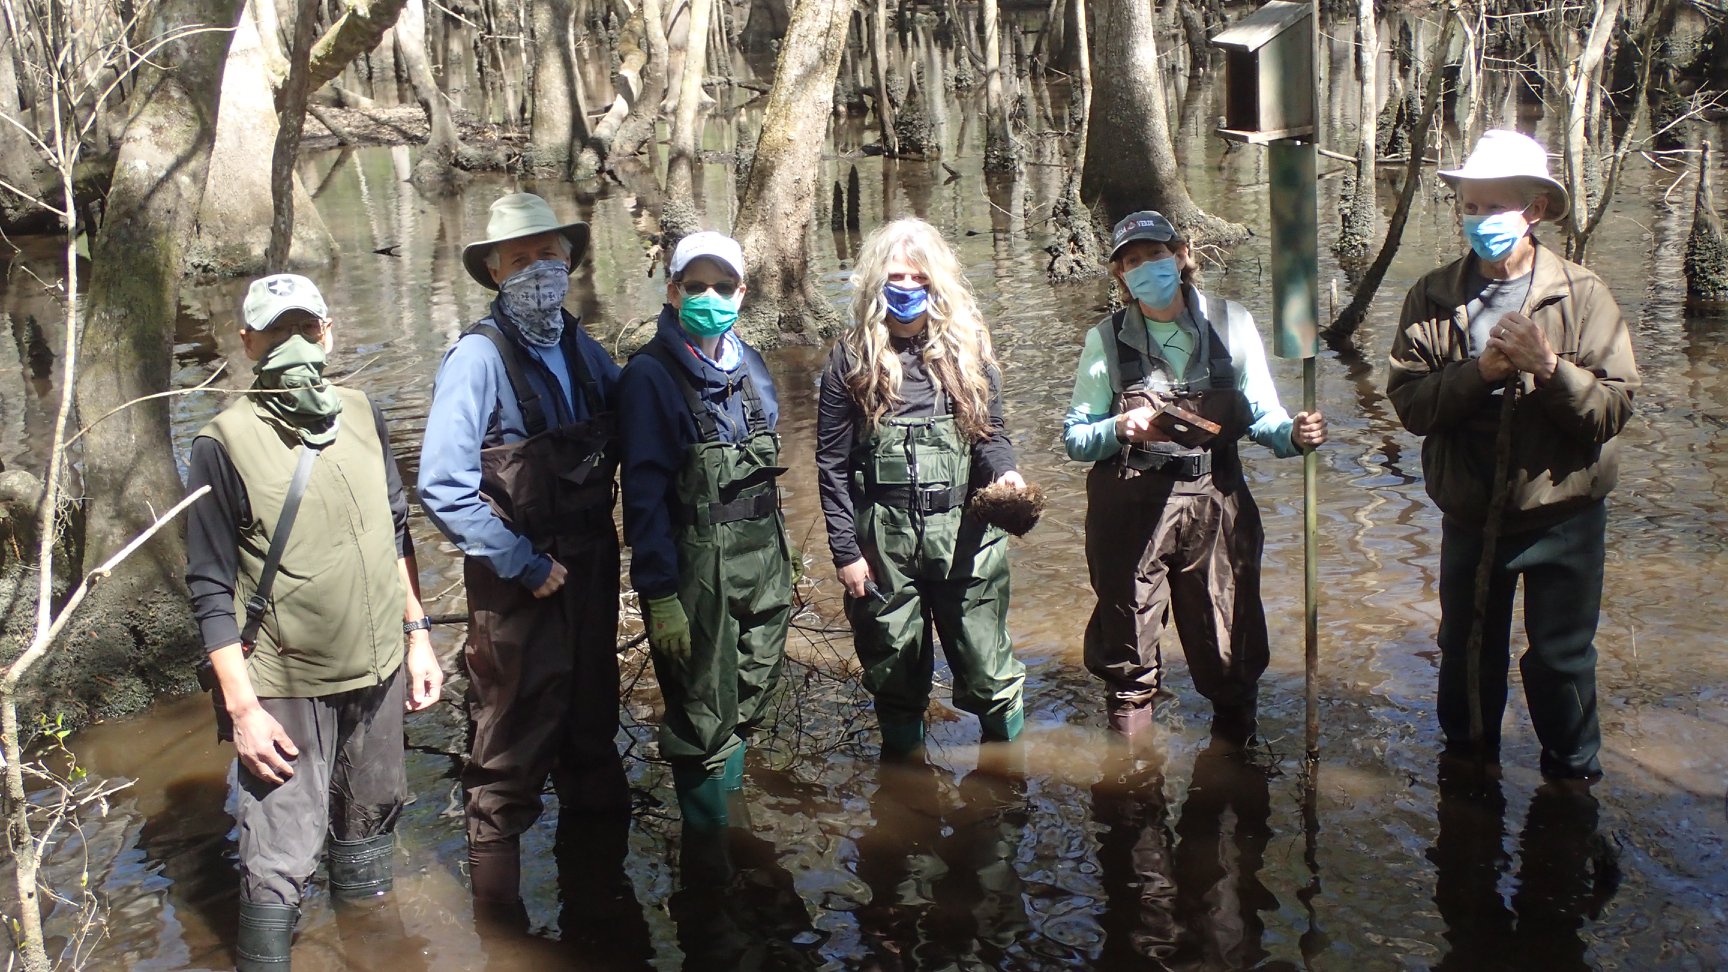 Six people are wading in a swamp with boots and waders gathered together with masks emptying a bird nest box. A woman is holding the nesting material in her hand that was removed. 